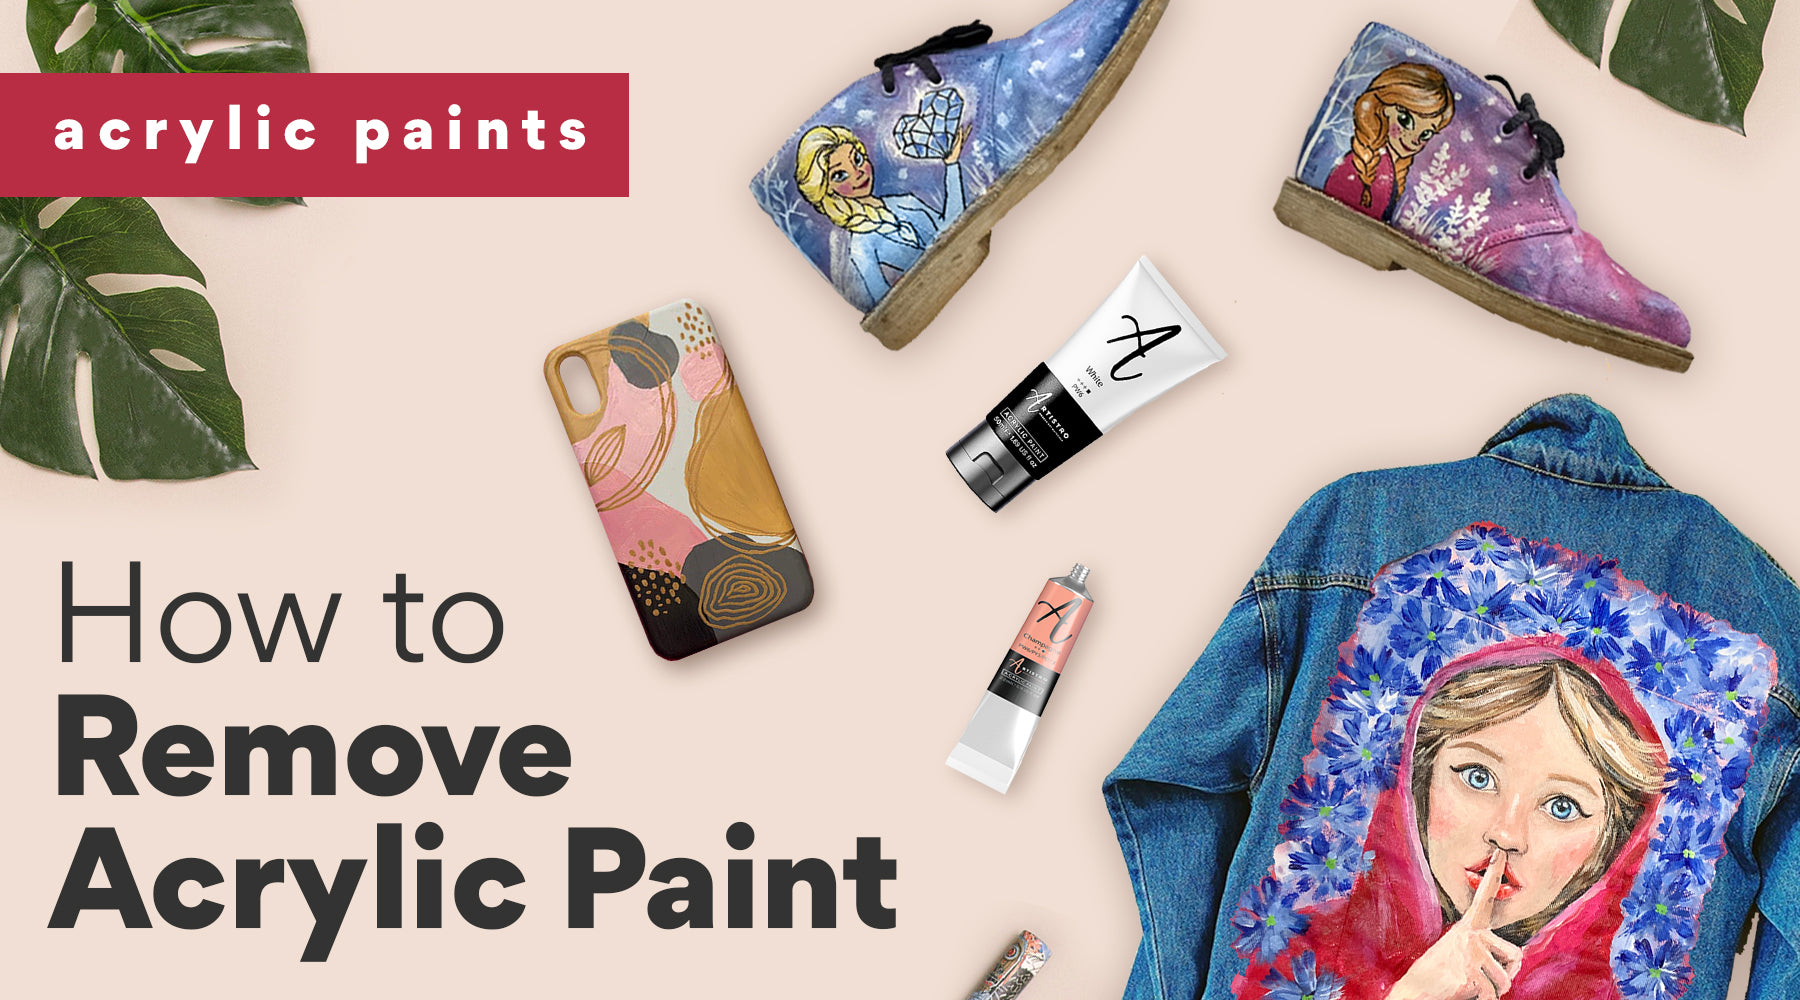 Does Vinegar Turn Acrylic Paint Into Fabric Paint?